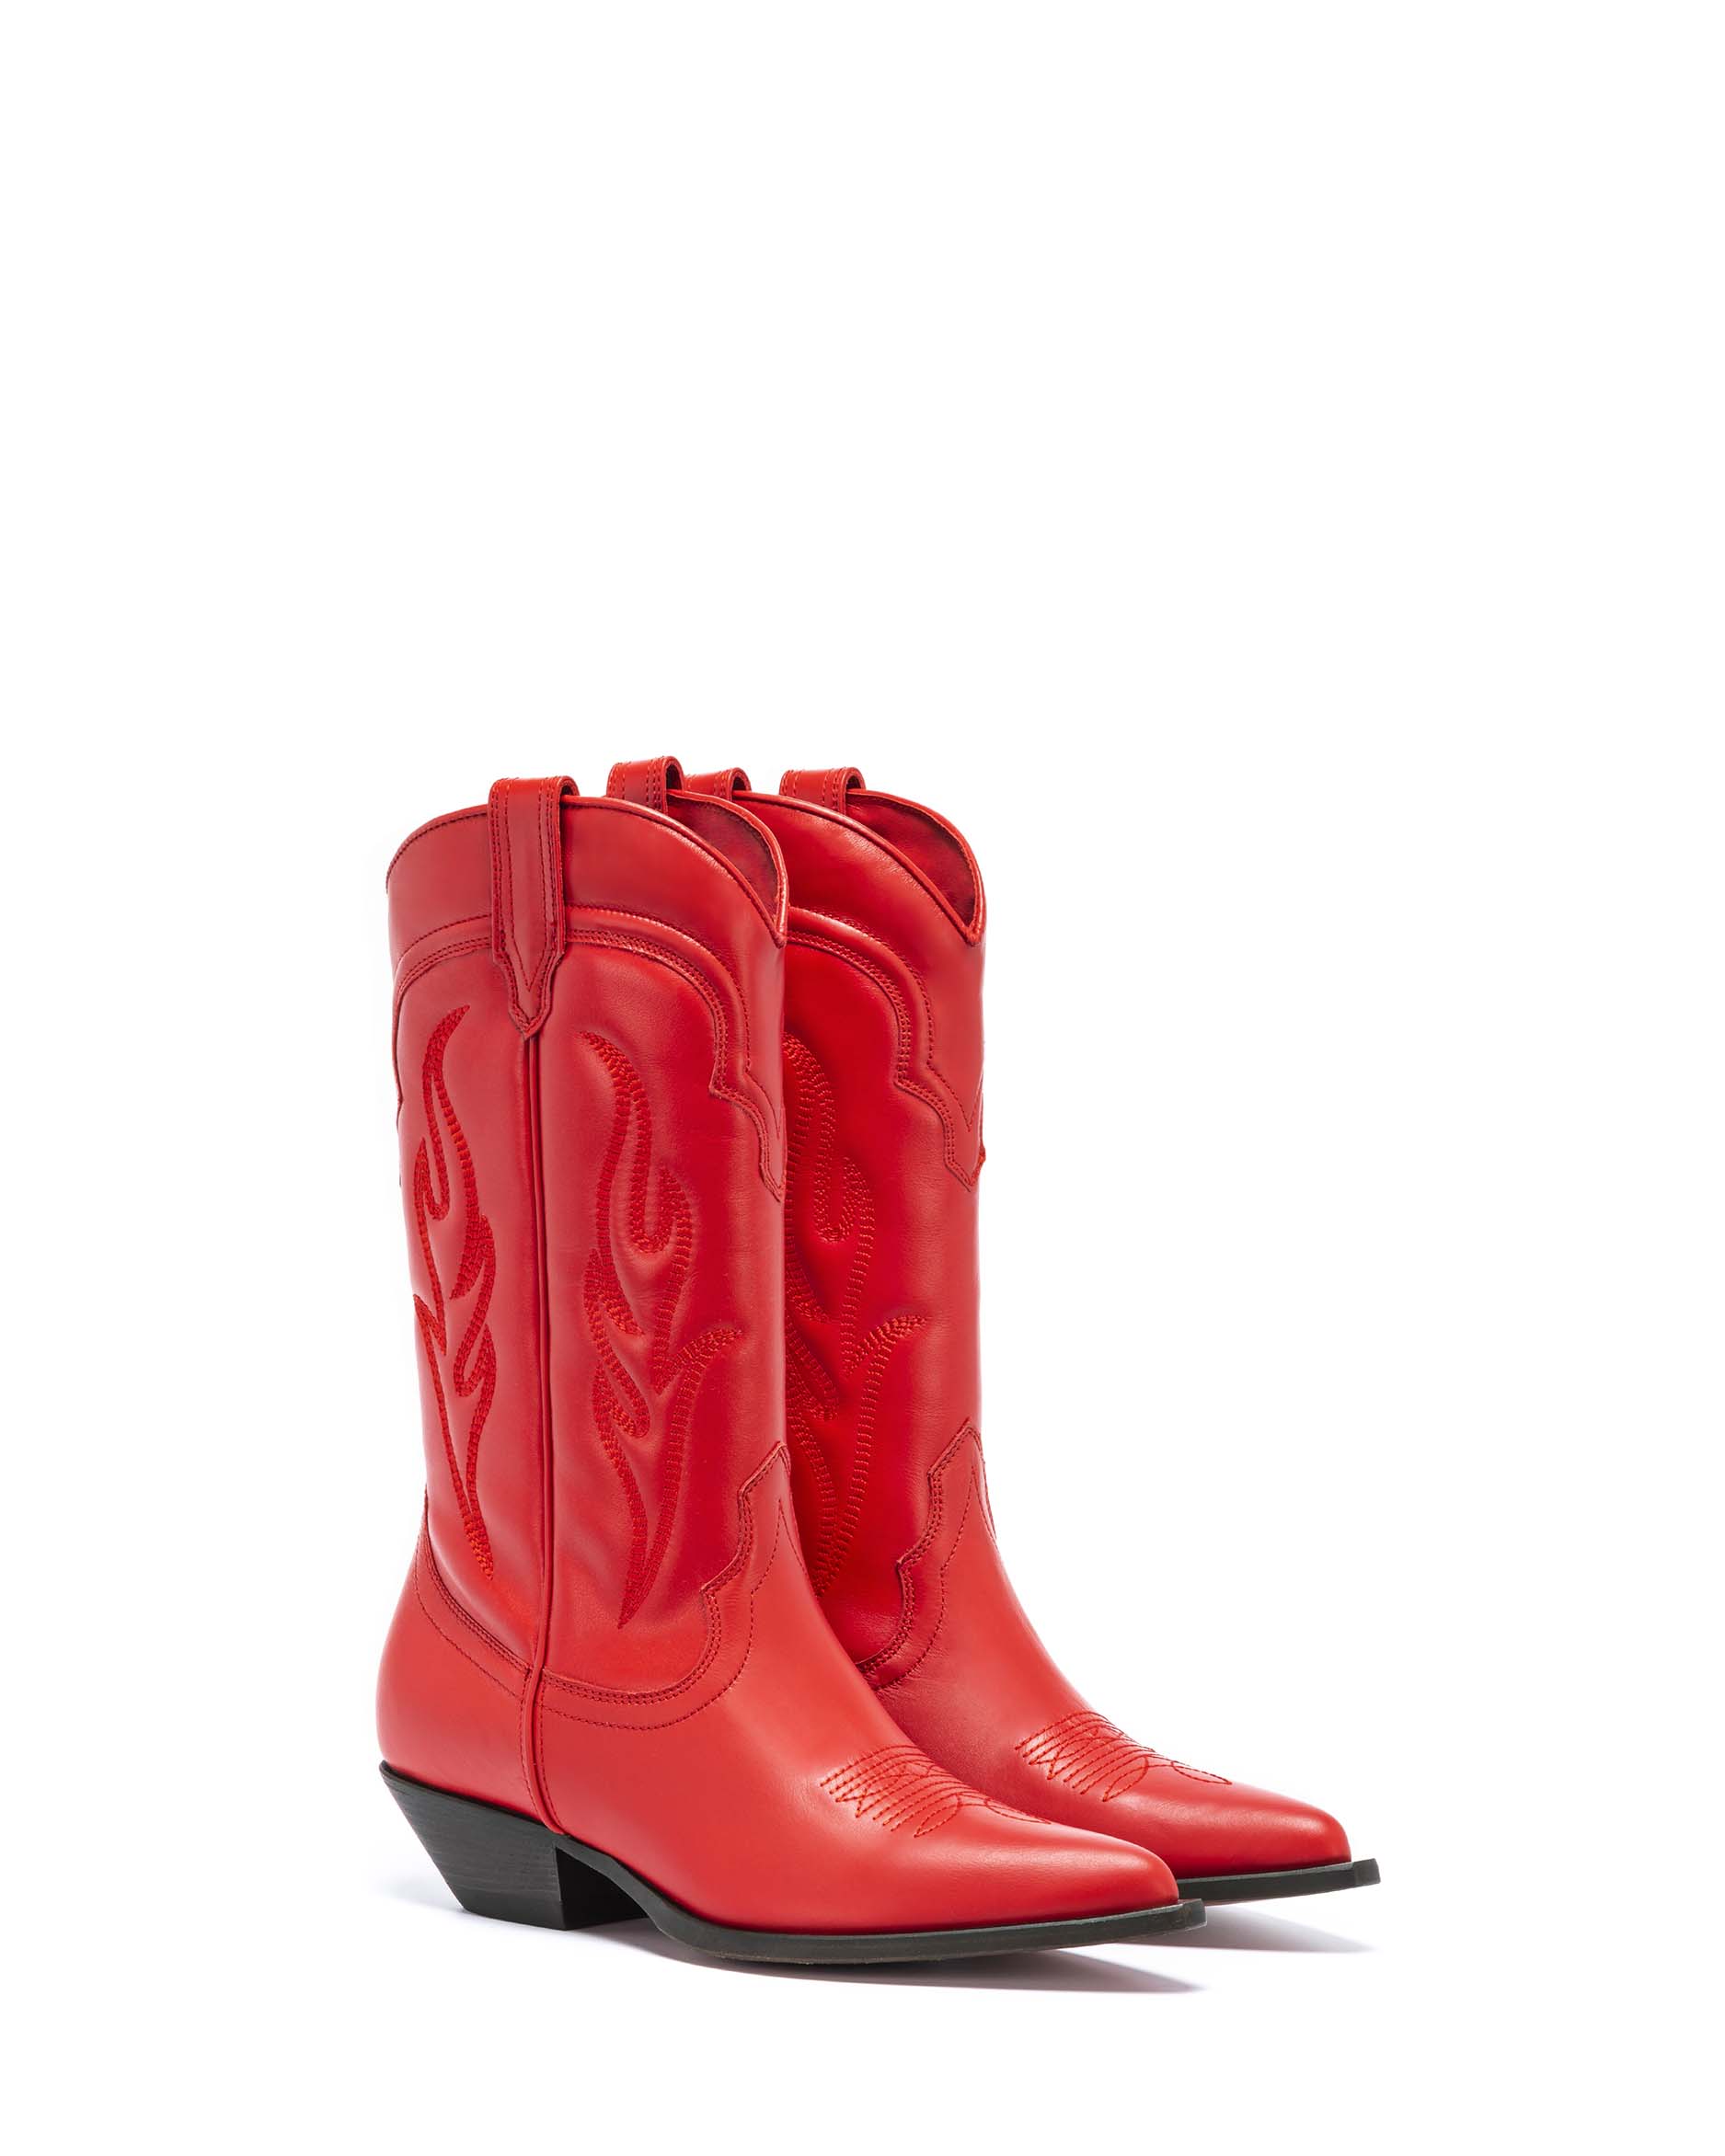 SANTA FE Women's Cowboy Boots in Red Calfskin | On tone embroidery_Front_01